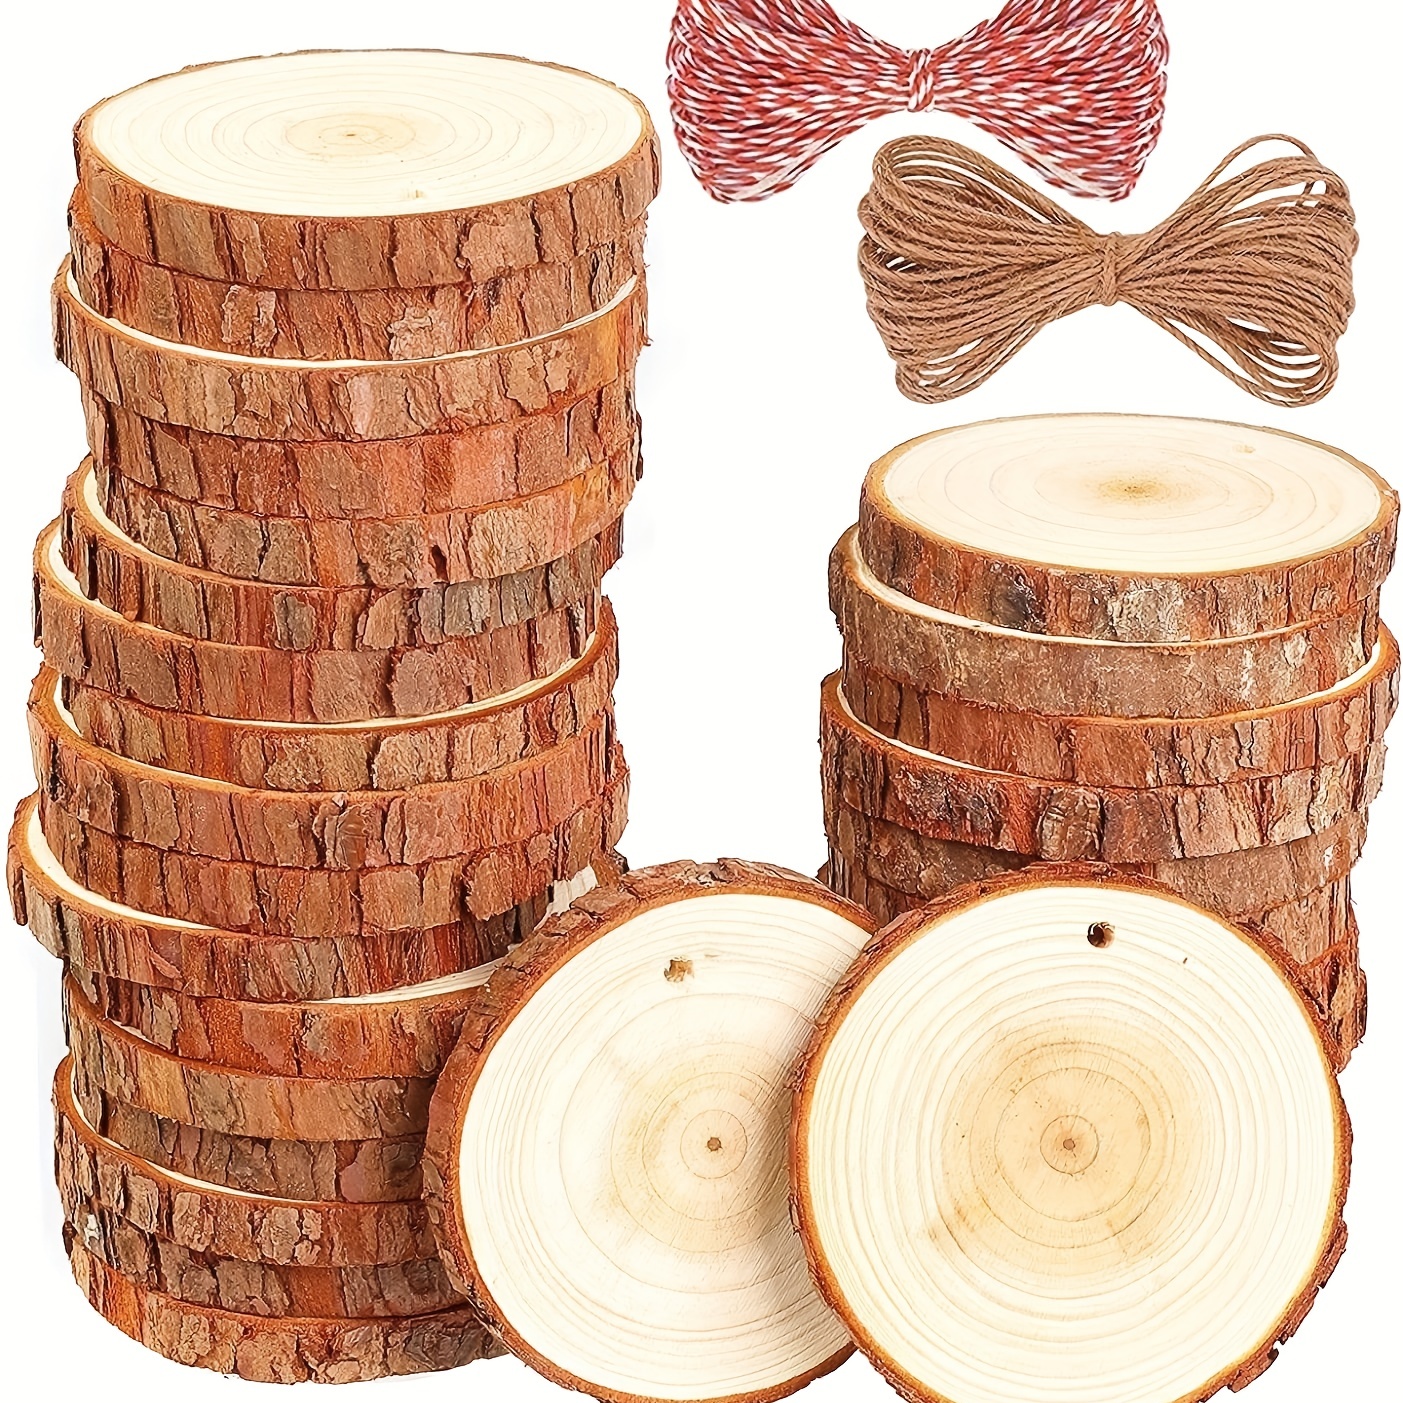 Unfinished Natural Wood Slices 30 Pcs 2.4-2.8 inch Wood Coaster Pieces Craft Wood Kit Predrilled with Hole Wooden Circles Great for Arts and Crafts